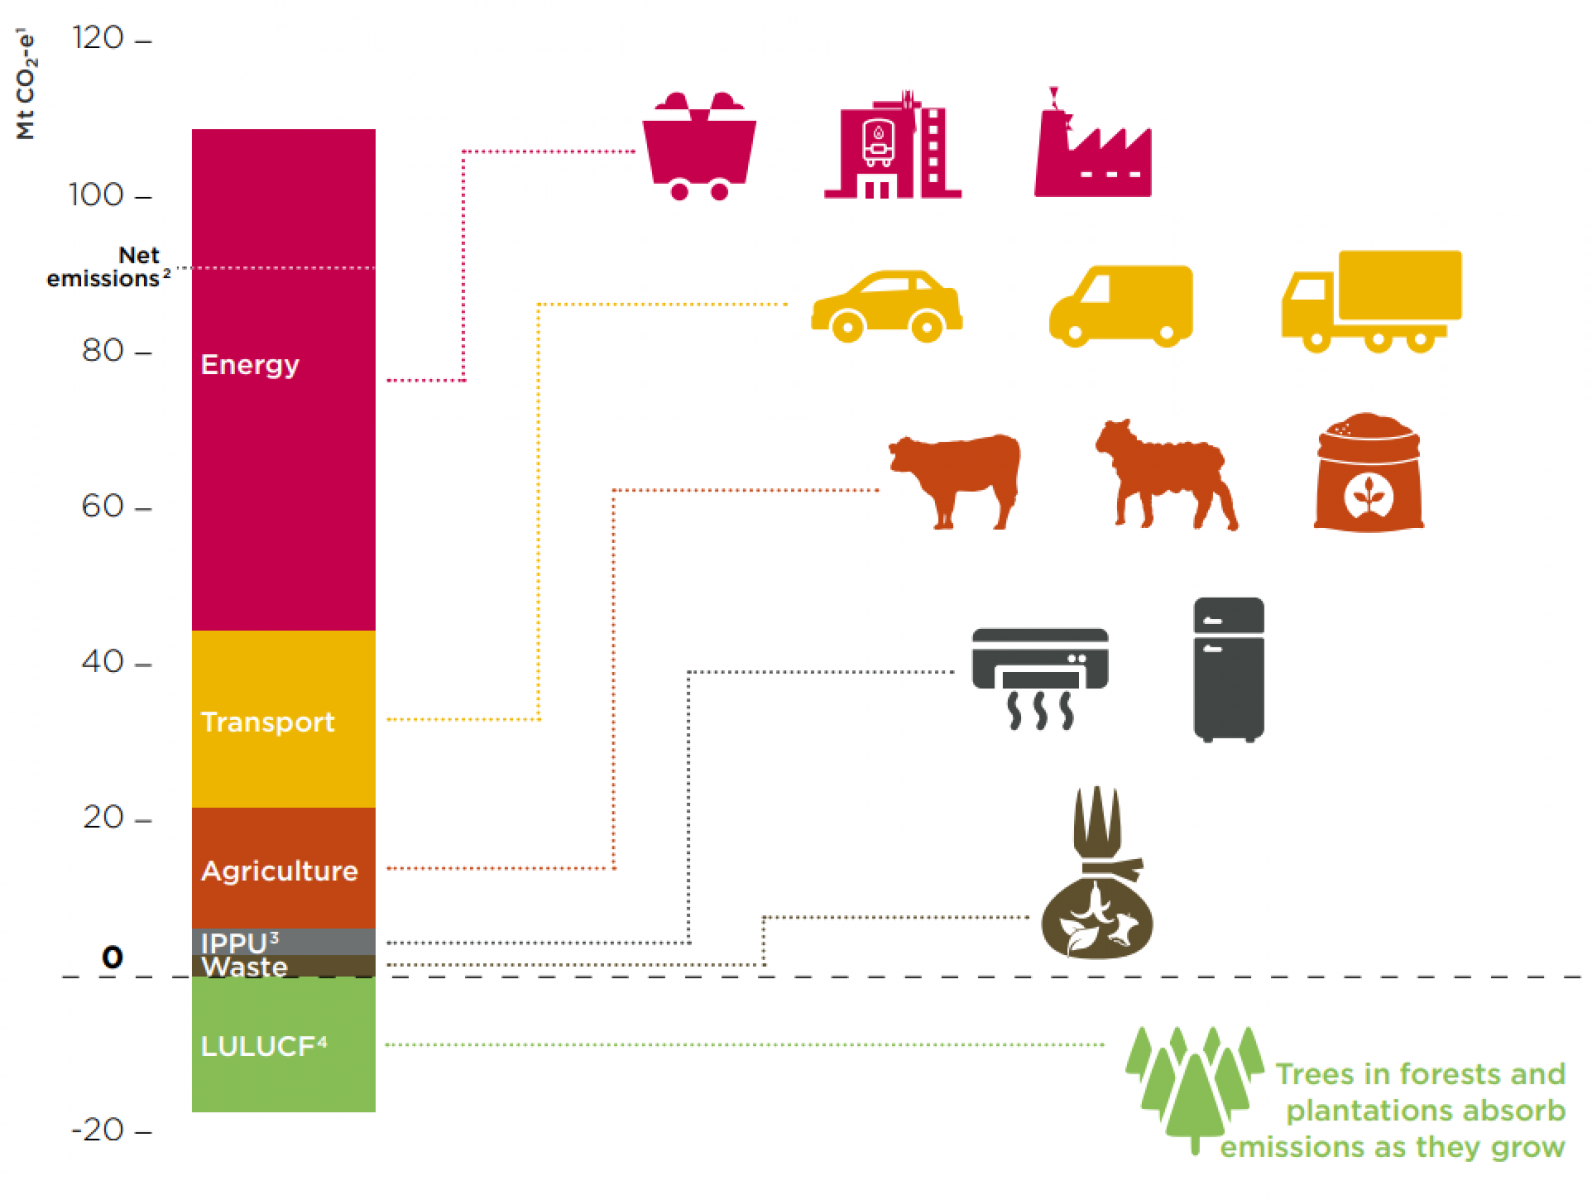 Diagram: Where Victoria's emissions come from by industry. Energy (approx 110 - 40 MTCO2e). Transport (approx 40 - 20 Where Victoria's emissions come from by industry diagram. Energy (approx 110 - 40 MTCO2e). Agriculture (approx 20 - 5 Where Victoria's emissions come from by industry diagram. Energy (approx 110 - 40 MTCO2e) IPPU (approx 5 - 10 Where Victoria's emissions come from by industry diagram. Energy (approx 110 - 40 MTCO2e) waste (0 - 5 Where Victoria's emissions come from by industry diagram. Energy (approx 110 - 40 MTCO2e). LULUCF - Trees in forests and plantations absorb emissions as they grow.